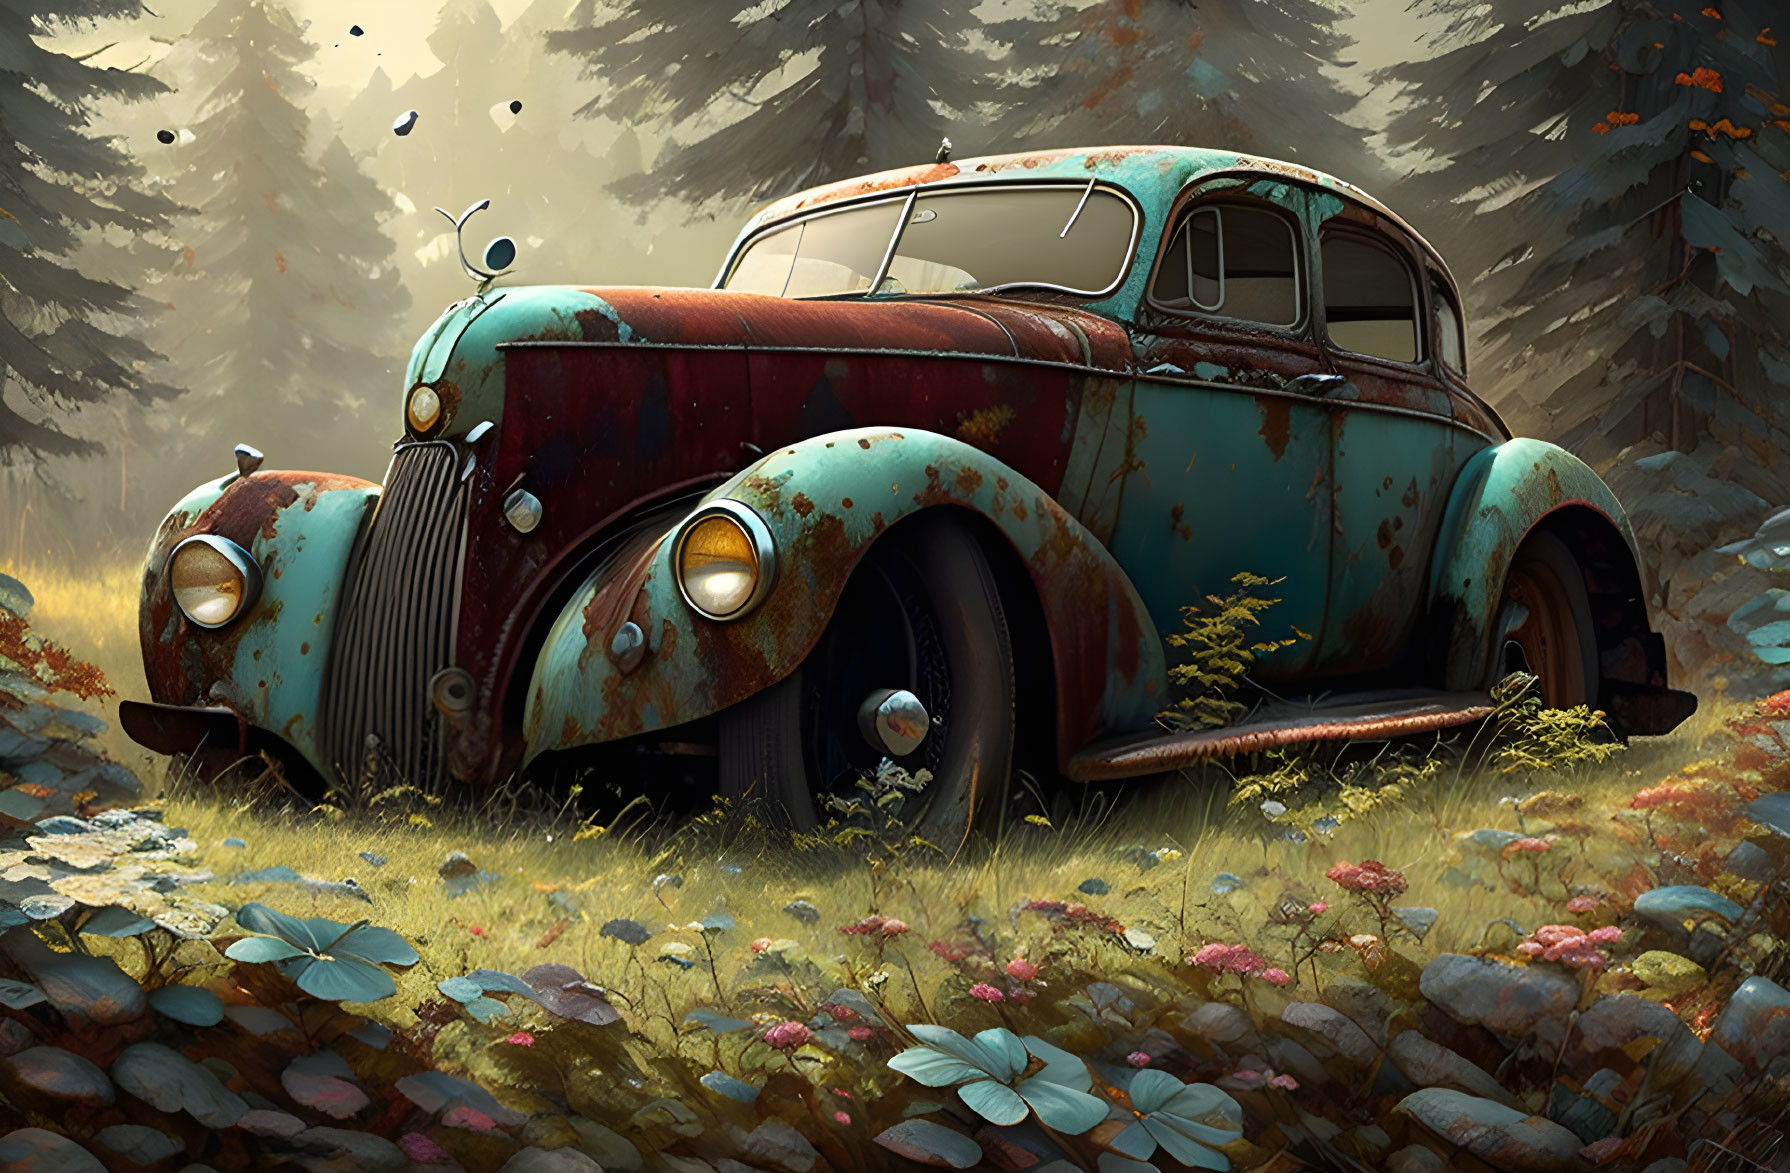 Abandoned vintage car engulfed by nature in a mystical forest